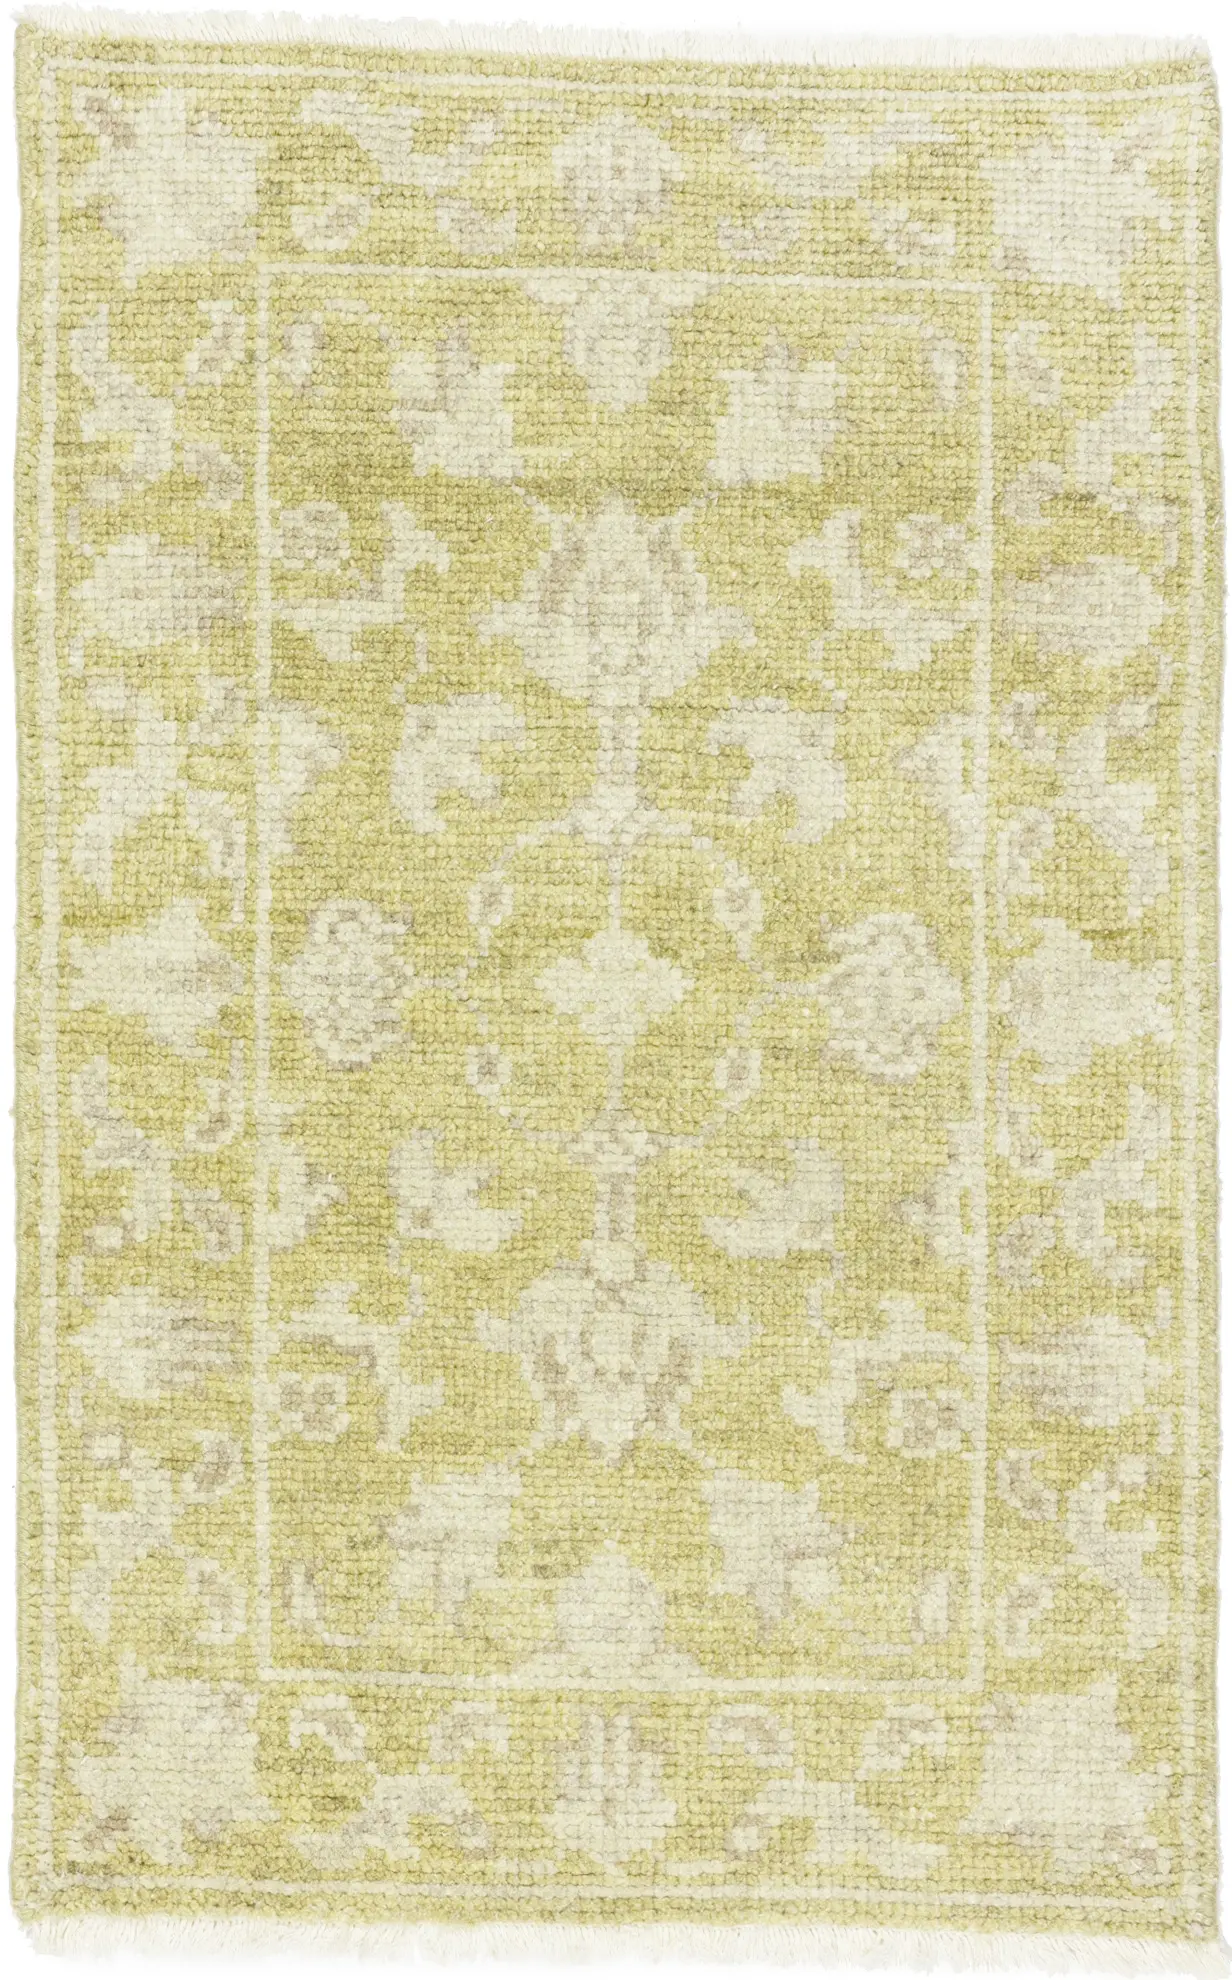 Muted Golden Yellow Floral 2X3 Transitional Oriental Rug